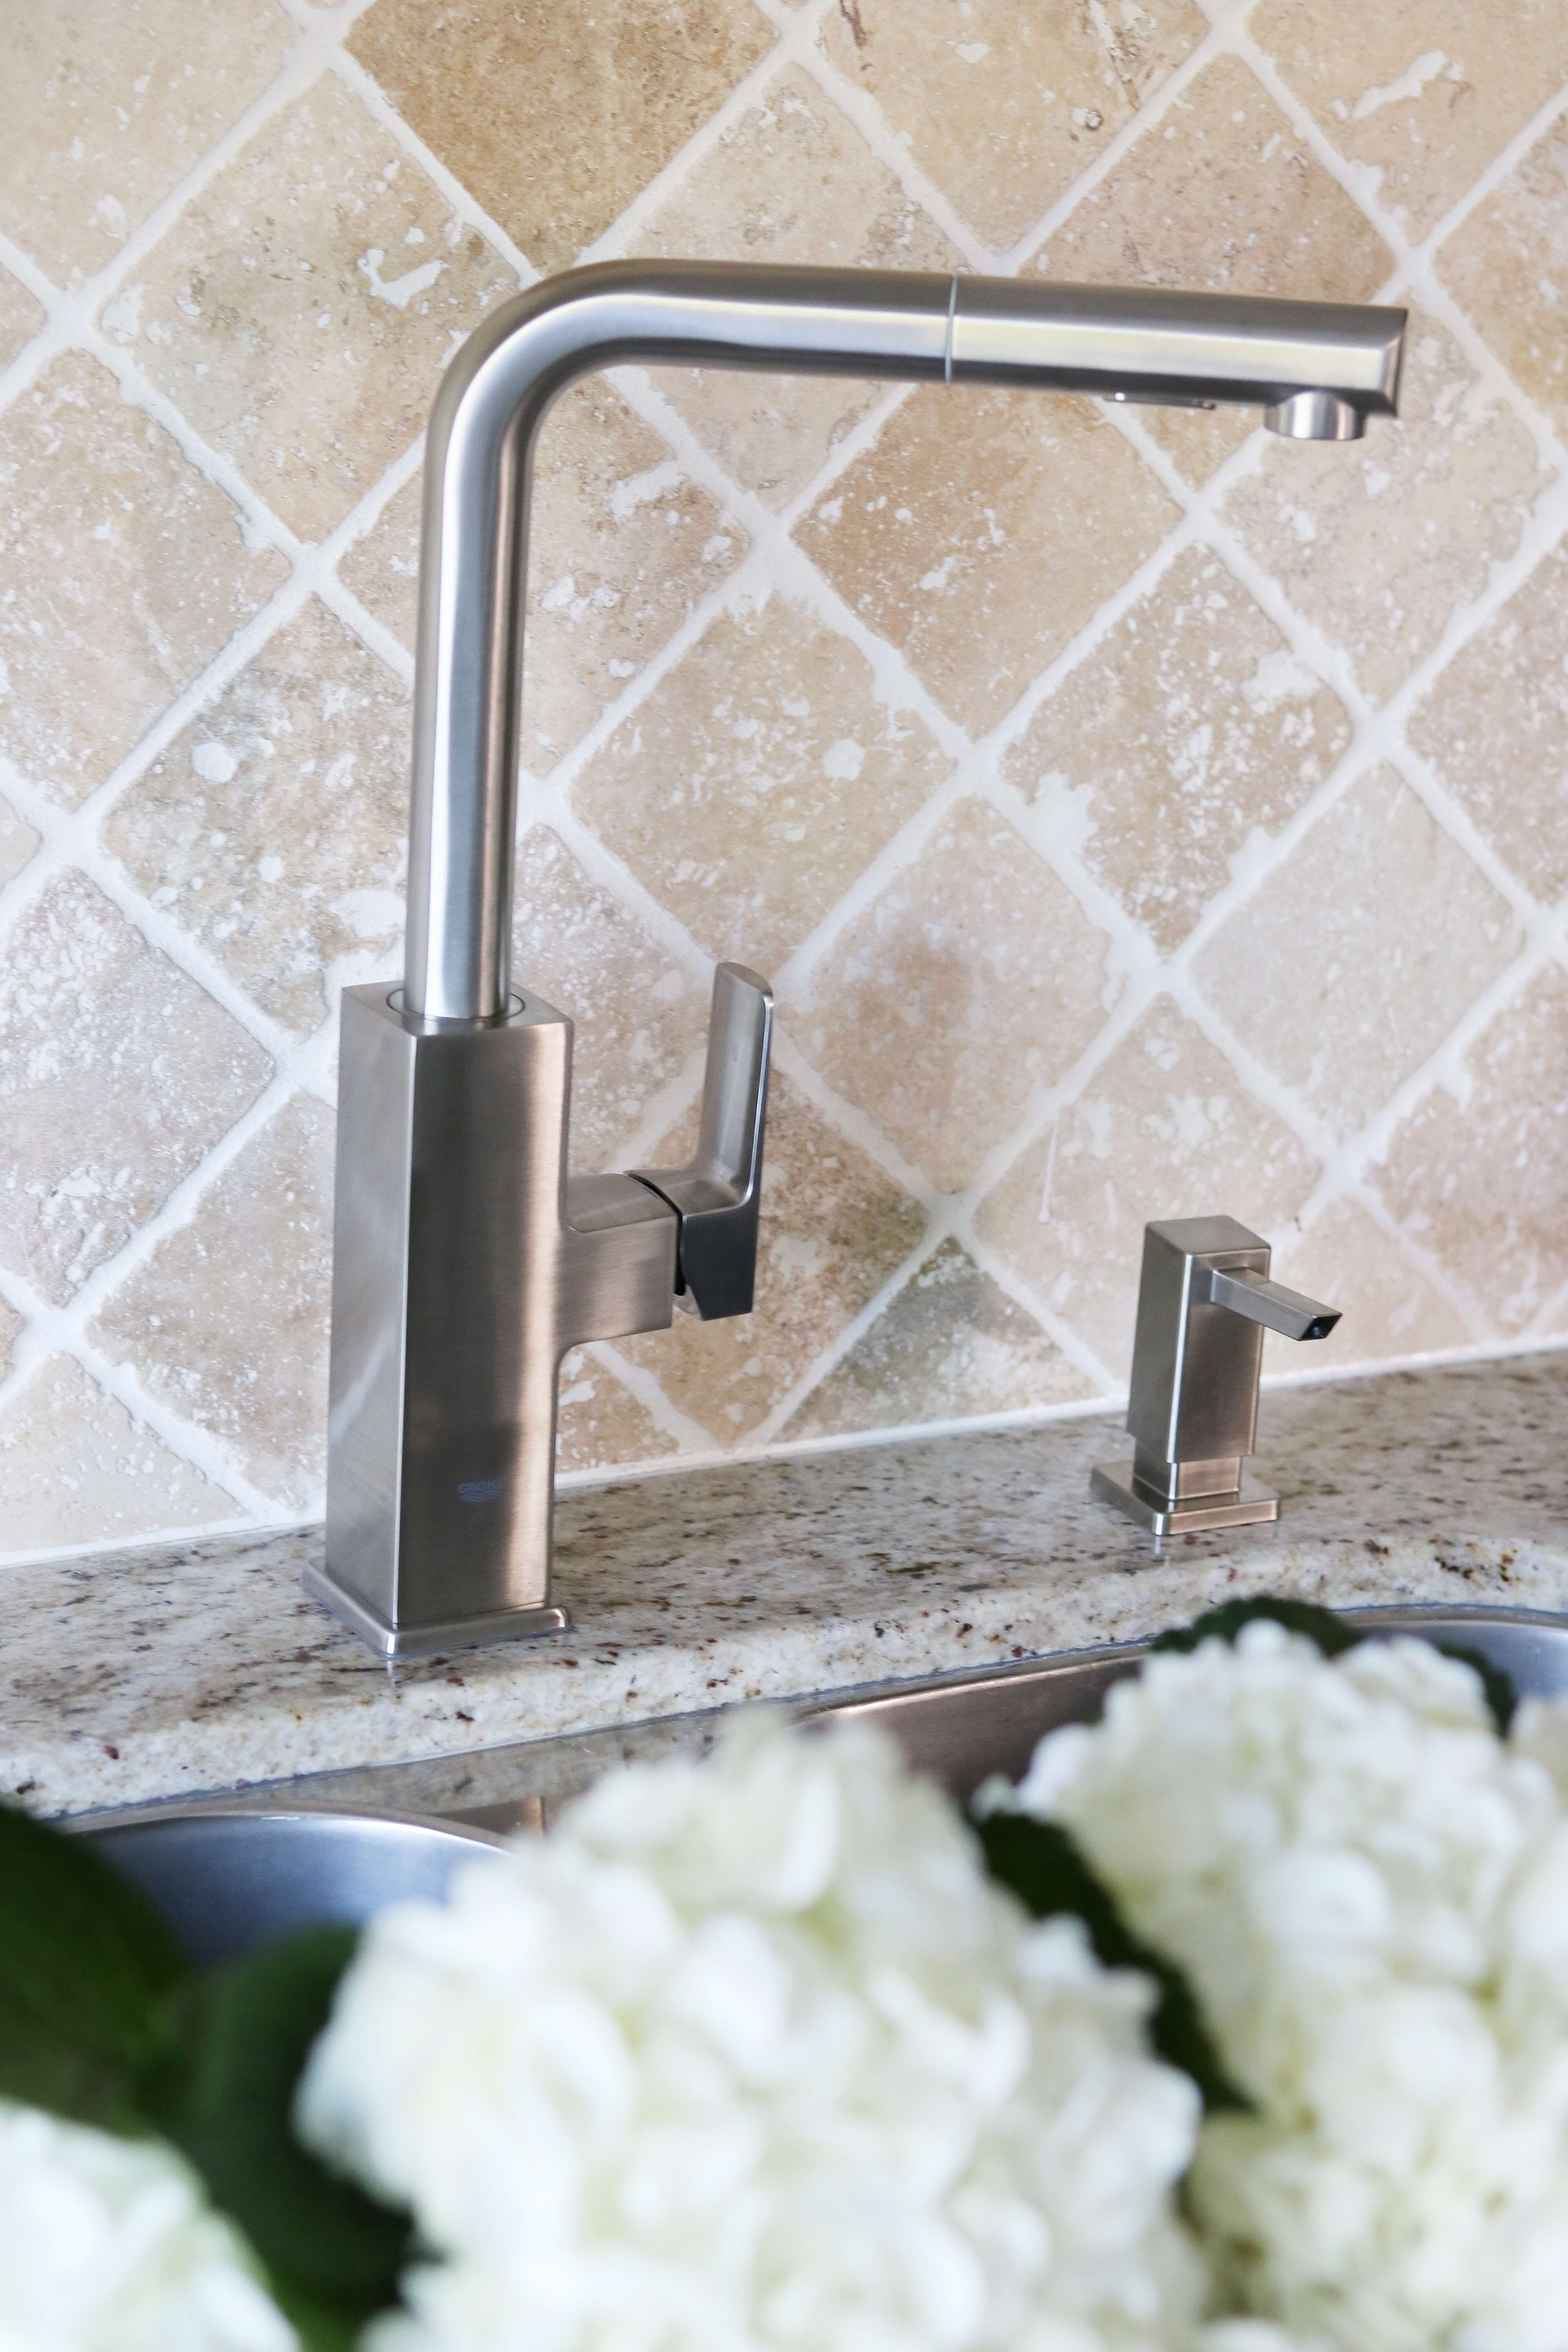 Home Depot Canada Kitchen update Grohe “Tallinn” Kitchen Pull-Out Faucet sparkleshinylove